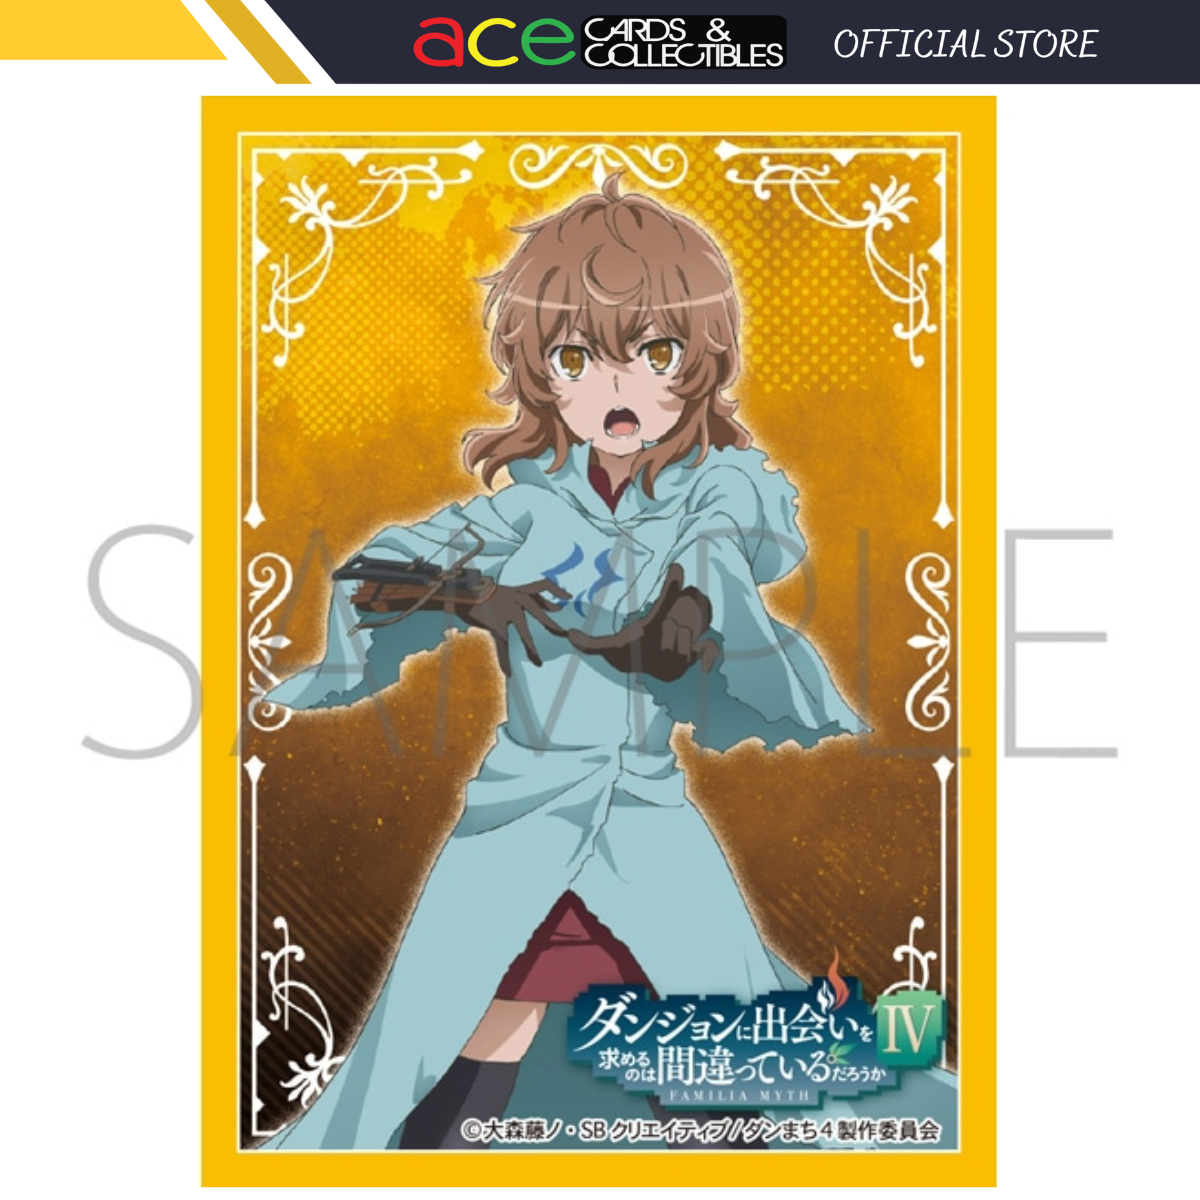 Chocorin Mascot Series Spy x Family - Ace Cards & Collectibles